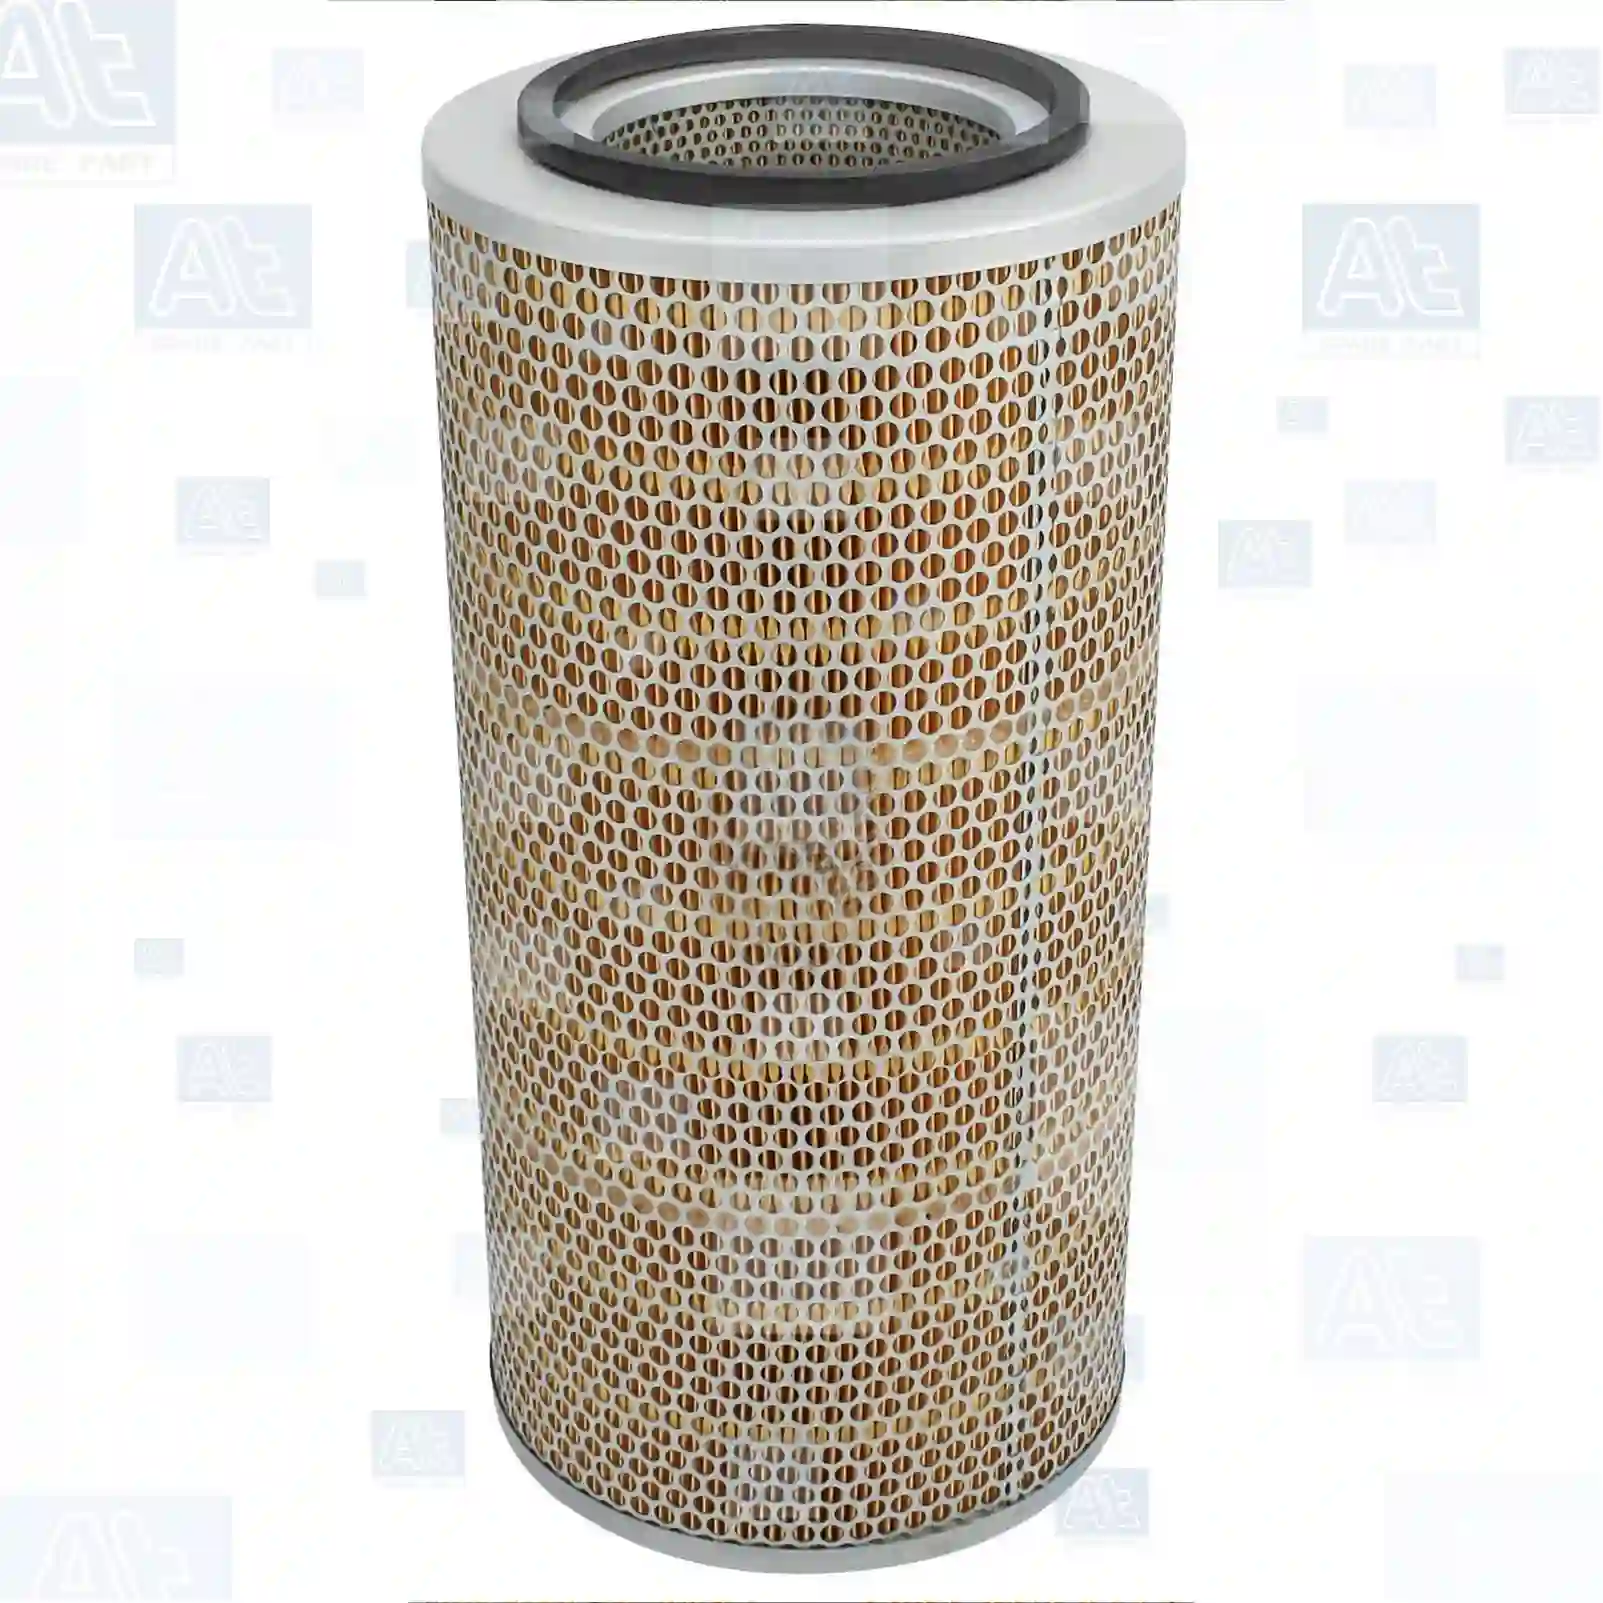 Air filter, 77706040, 060503834, 60503834, E156251, 3I-0879, 10947904, 120948702, 0006431690, 0006431691, 0006431692, 0607179, 607179, ABU8524, 00661874, 04278774, 29504356, 43262100, 988596, 98859600, 01901925, 04134403, 04193519, 04980649, 21650569, 605412970050, 698089, 1318965, 991312, 991612, 1170781, 1470637, 1470695, 1470718, 4134403, 8108340057, F291200090100, F291202090100, F926200090010, 01901925, 01902125, 02165056, 07126157, 08322989, 42015789, 74980649, Y05775902, DNP181137, 2994206, 9307856, 25096238, 9974143, 9304990010, 04445301, 00698089, 01901925, 01902125, 02165059, 04980649, 08322988, 08322989, 1901925, 2165059, 42015056, 4980649, 74980649, AZ48195, 24000504, 01901925, 02165056, 02165059, 04980649, 5103365, 5106181, 510618108, 7367183, 7367184, 04565092304, 08083040048, 08108205005, 08183040040, 64083010001, 64083010003, 64083040003, 81082050005, 81083040040, 81083040041, 81083040048, 81083040057, 81083040060, 88183040040, N2083040012, 0010945104, 0010947904, 0120948702, 3500947004, 3510947004, 4050940202, 8319086094, 605412970050, 020310101, 80753486, 584576, 689089, 698089, 6LS551A4, 99012190137, 99012190705, 99112190705, 0002286040, 0003653608, 0500242504, 5001829572, 6005019670, 7700042054, R517, ABU8524, 2165059, 4631072040, 217517, 219517, 219519, 246128, 83190586094, 8319086094, 1293400212, 1293400241, 99000190137, 99012190037, 99012190137, 99012190705, 99112190705, 621204720, 631201530, 631203430, 3338849, CH12235, 4785748, 47857485, 47857487, 4785784, 660289, 6640289, T15129620B, ZG00848-0008 ||  77706040 At Spare Part | Engine, Accelerator Pedal, Camshaft, Connecting Rod, Crankcase, Crankshaft, Cylinder Head, Engine Suspension Mountings, Exhaust Manifold, Exhaust Gas Recirculation, Filter Kits, Flywheel Housing, General Overhaul Kits, Engine, Intake Manifold, Oil Cleaner, Oil Cooler, Oil Filter, Oil Pump, Oil Sump, Piston & Liner, Sensor & Switch, Timing Case, Turbocharger, Cooling System, Belt Tensioner, Coolant Filter, Coolant Pipe, Corrosion Prevention Agent, Drive, Expansion Tank, Fan, Intercooler, Monitors & Gauges, Radiator, Thermostat, V-Belt / Timing belt, Water Pump, Fuel System, Electronical Injector Unit, Feed Pump, Fuel Filter, cpl., Fuel Gauge Sender,  Fuel Line, Fuel Pump, Fuel Tank, Injection Line Kit, Injection Pump, Exhaust System, Clutch & Pedal, Gearbox, Propeller Shaft, Axles, Brake System, Hubs & Wheels, Suspension, Leaf Spring, Universal Parts / Accessories, Steering, Electrical System, Cabin Air filter, 77706040, 060503834, 60503834, E156251, 3I-0879, 10947904, 120948702, 0006431690, 0006431691, 0006431692, 0607179, 607179, ABU8524, 00661874, 04278774, 29504356, 43262100, 988596, 98859600, 01901925, 04134403, 04193519, 04980649, 21650569, 605412970050, 698089, 1318965, 991312, 991612, 1170781, 1470637, 1470695, 1470718, 4134403, 8108340057, F291200090100, F291202090100, F926200090010, 01901925, 01902125, 02165056, 07126157, 08322989, 42015789, 74980649, Y05775902, DNP181137, 2994206, 9307856, 25096238, 9974143, 9304990010, 04445301, 00698089, 01901925, 01902125, 02165059, 04980649, 08322988, 08322989, 1901925, 2165059, 42015056, 4980649, 74980649, AZ48195, 24000504, 01901925, 02165056, 02165059, 04980649, 5103365, 5106181, 510618108, 7367183, 7367184, 04565092304, 08083040048, 08108205005, 08183040040, 64083010001, 64083010003, 64083040003, 81082050005, 81083040040, 81083040041, 81083040048, 81083040057, 81083040060, 88183040040, N2083040012, 0010945104, 0010947904, 0120948702, 3500947004, 3510947004, 4050940202, 8319086094, 605412970050, 020310101, 80753486, 584576, 689089, 698089, 6LS551A4, 99012190137, 99012190705, 99112190705, 0002286040, 0003653608, 0500242504, 5001829572, 6005019670, 7700042054, R517, ABU8524, 2165059, 4631072040, 217517, 219517, 219519, 246128, 83190586094, 8319086094, 1293400212, 1293400241, 99000190137, 99012190037, 99012190137, 99012190705, 99112190705, 621204720, 631201530, 631203430, 3338849, CH12235, 4785748, 47857485, 47857487, 4785784, 660289, 6640289, T15129620B, ZG00848-0008 ||  77706040 At Spare Part | Engine, Accelerator Pedal, Camshaft, Connecting Rod, Crankcase, Crankshaft, Cylinder Head, Engine Suspension Mountings, Exhaust Manifold, Exhaust Gas Recirculation, Filter Kits, Flywheel Housing, General Overhaul Kits, Engine, Intake Manifold, Oil Cleaner, Oil Cooler, Oil Filter, Oil Pump, Oil Sump, Piston & Liner, Sensor & Switch, Timing Case, Turbocharger, Cooling System, Belt Tensioner, Coolant Filter, Coolant Pipe, Corrosion Prevention Agent, Drive, Expansion Tank, Fan, Intercooler, Monitors & Gauges, Radiator, Thermostat, V-Belt / Timing belt, Water Pump, Fuel System, Electronical Injector Unit, Feed Pump, Fuel Filter, cpl., Fuel Gauge Sender,  Fuel Line, Fuel Pump, Fuel Tank, Injection Line Kit, Injection Pump, Exhaust System, Clutch & Pedal, Gearbox, Propeller Shaft, Axles, Brake System, Hubs & Wheels, Suspension, Leaf Spring, Universal Parts / Accessories, Steering, Electrical System, Cabin